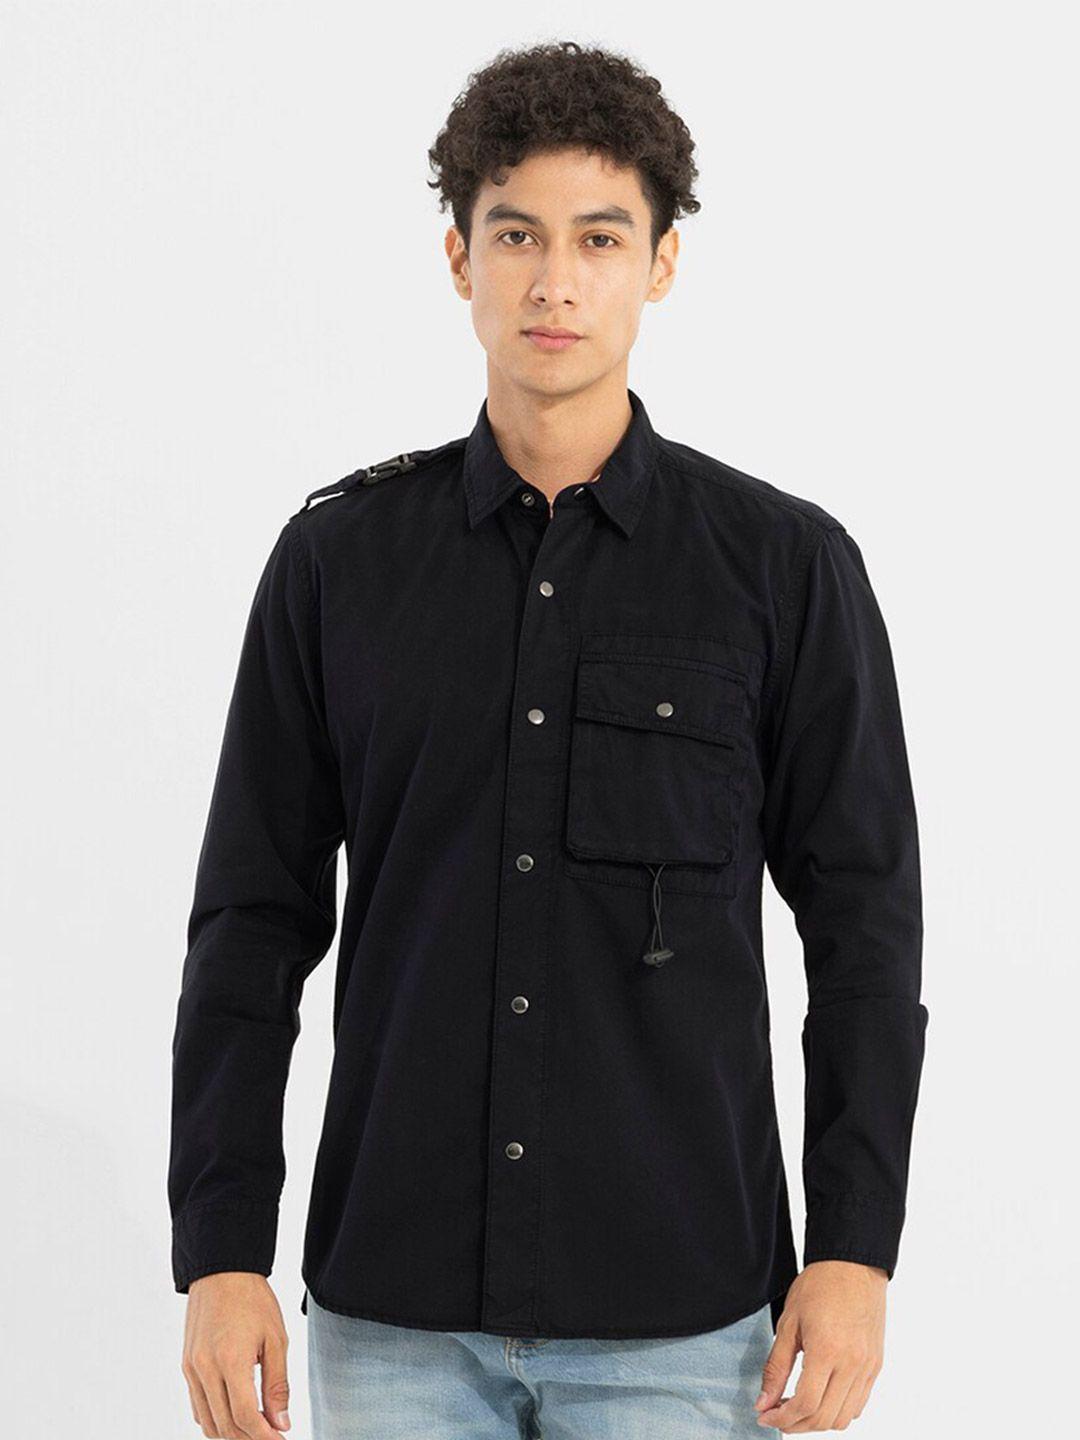 snitch black classic regular fit spread collar opaque cotton casual shirt